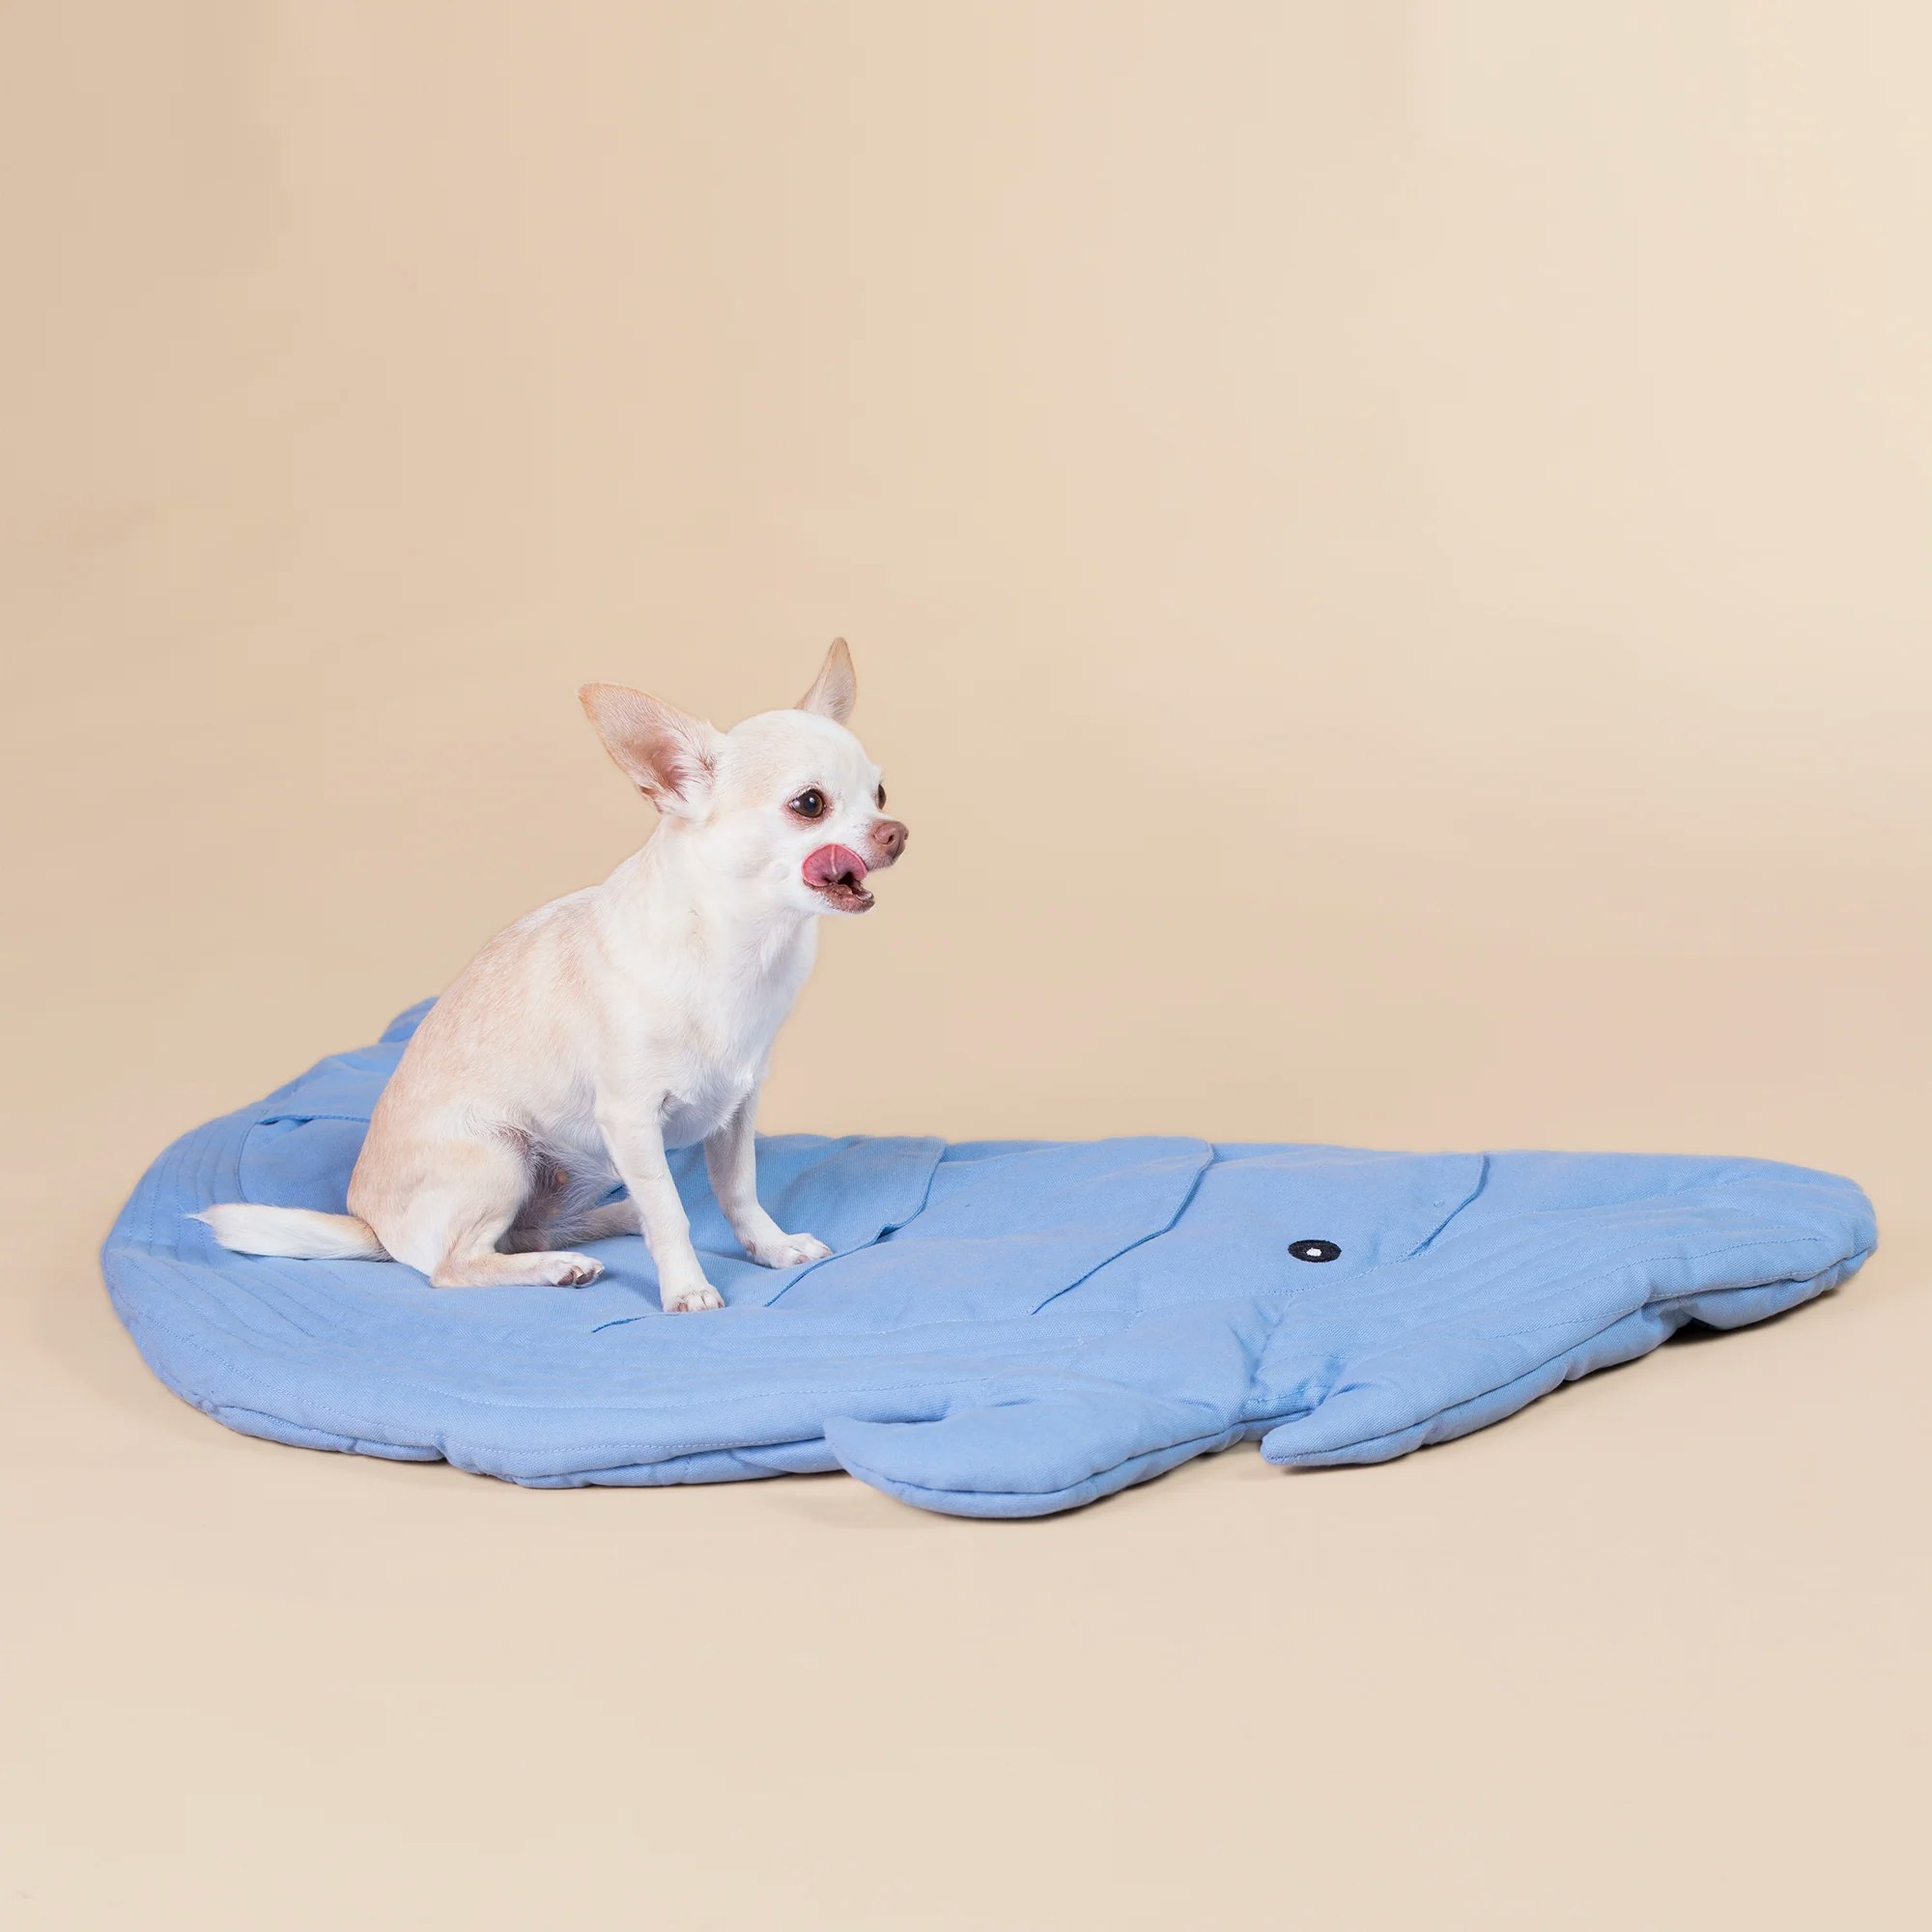 Paikka Playmat for Dogs, Whale